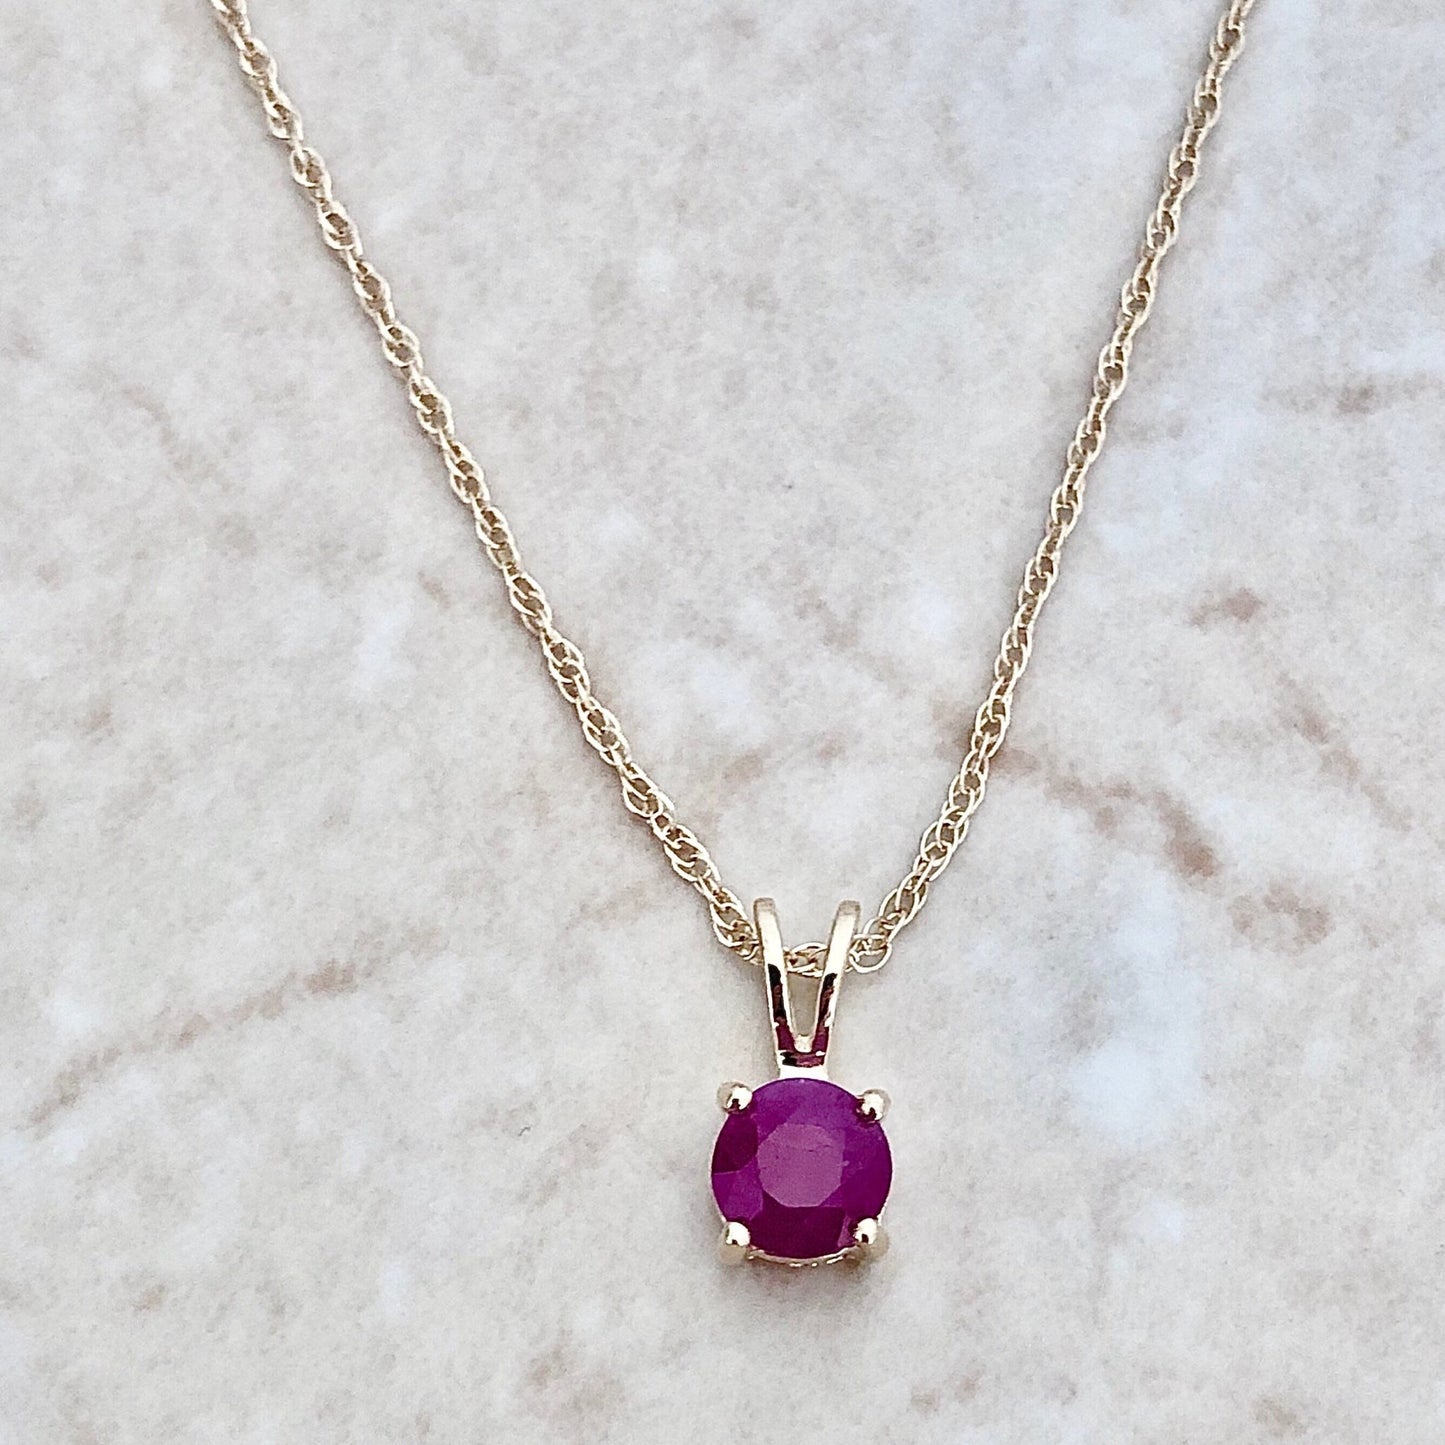 14K Natural Ruby Pendant Necklace - 14K Yellow Gold Ruby Necklace - July Birthstone Necklace - Round Ruby Necklace-Genuine Gemstone Pendant